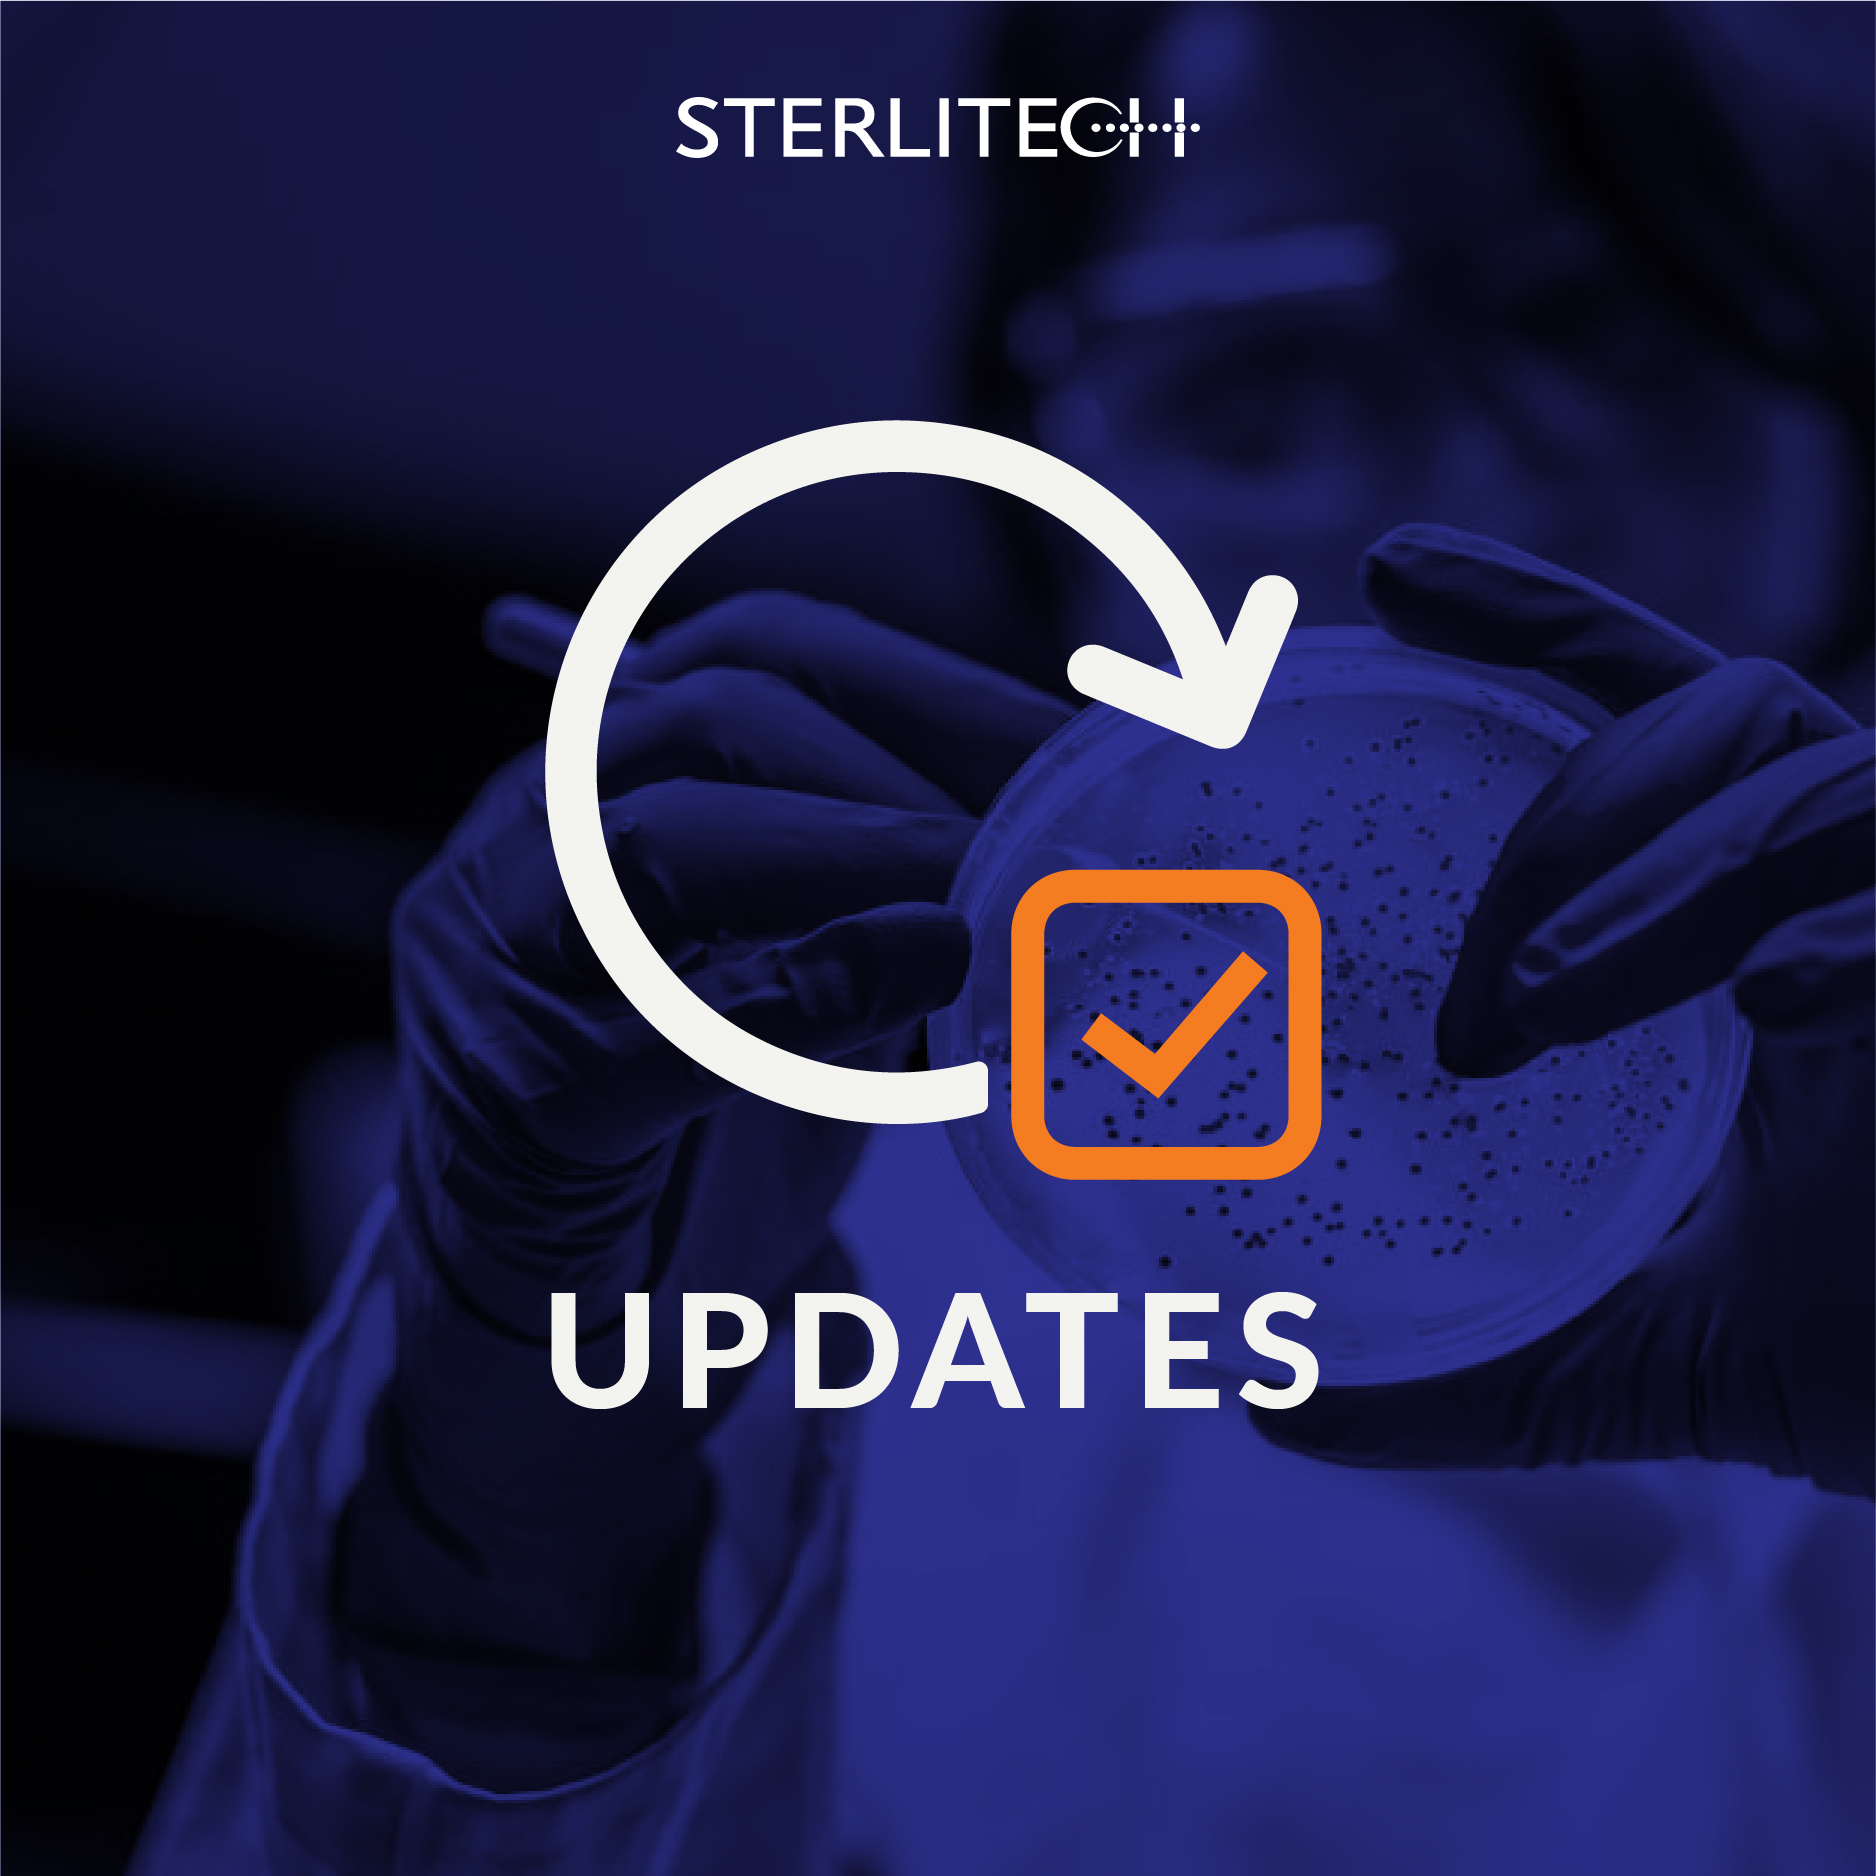 Sterlitech is Going to See You at ArabLab